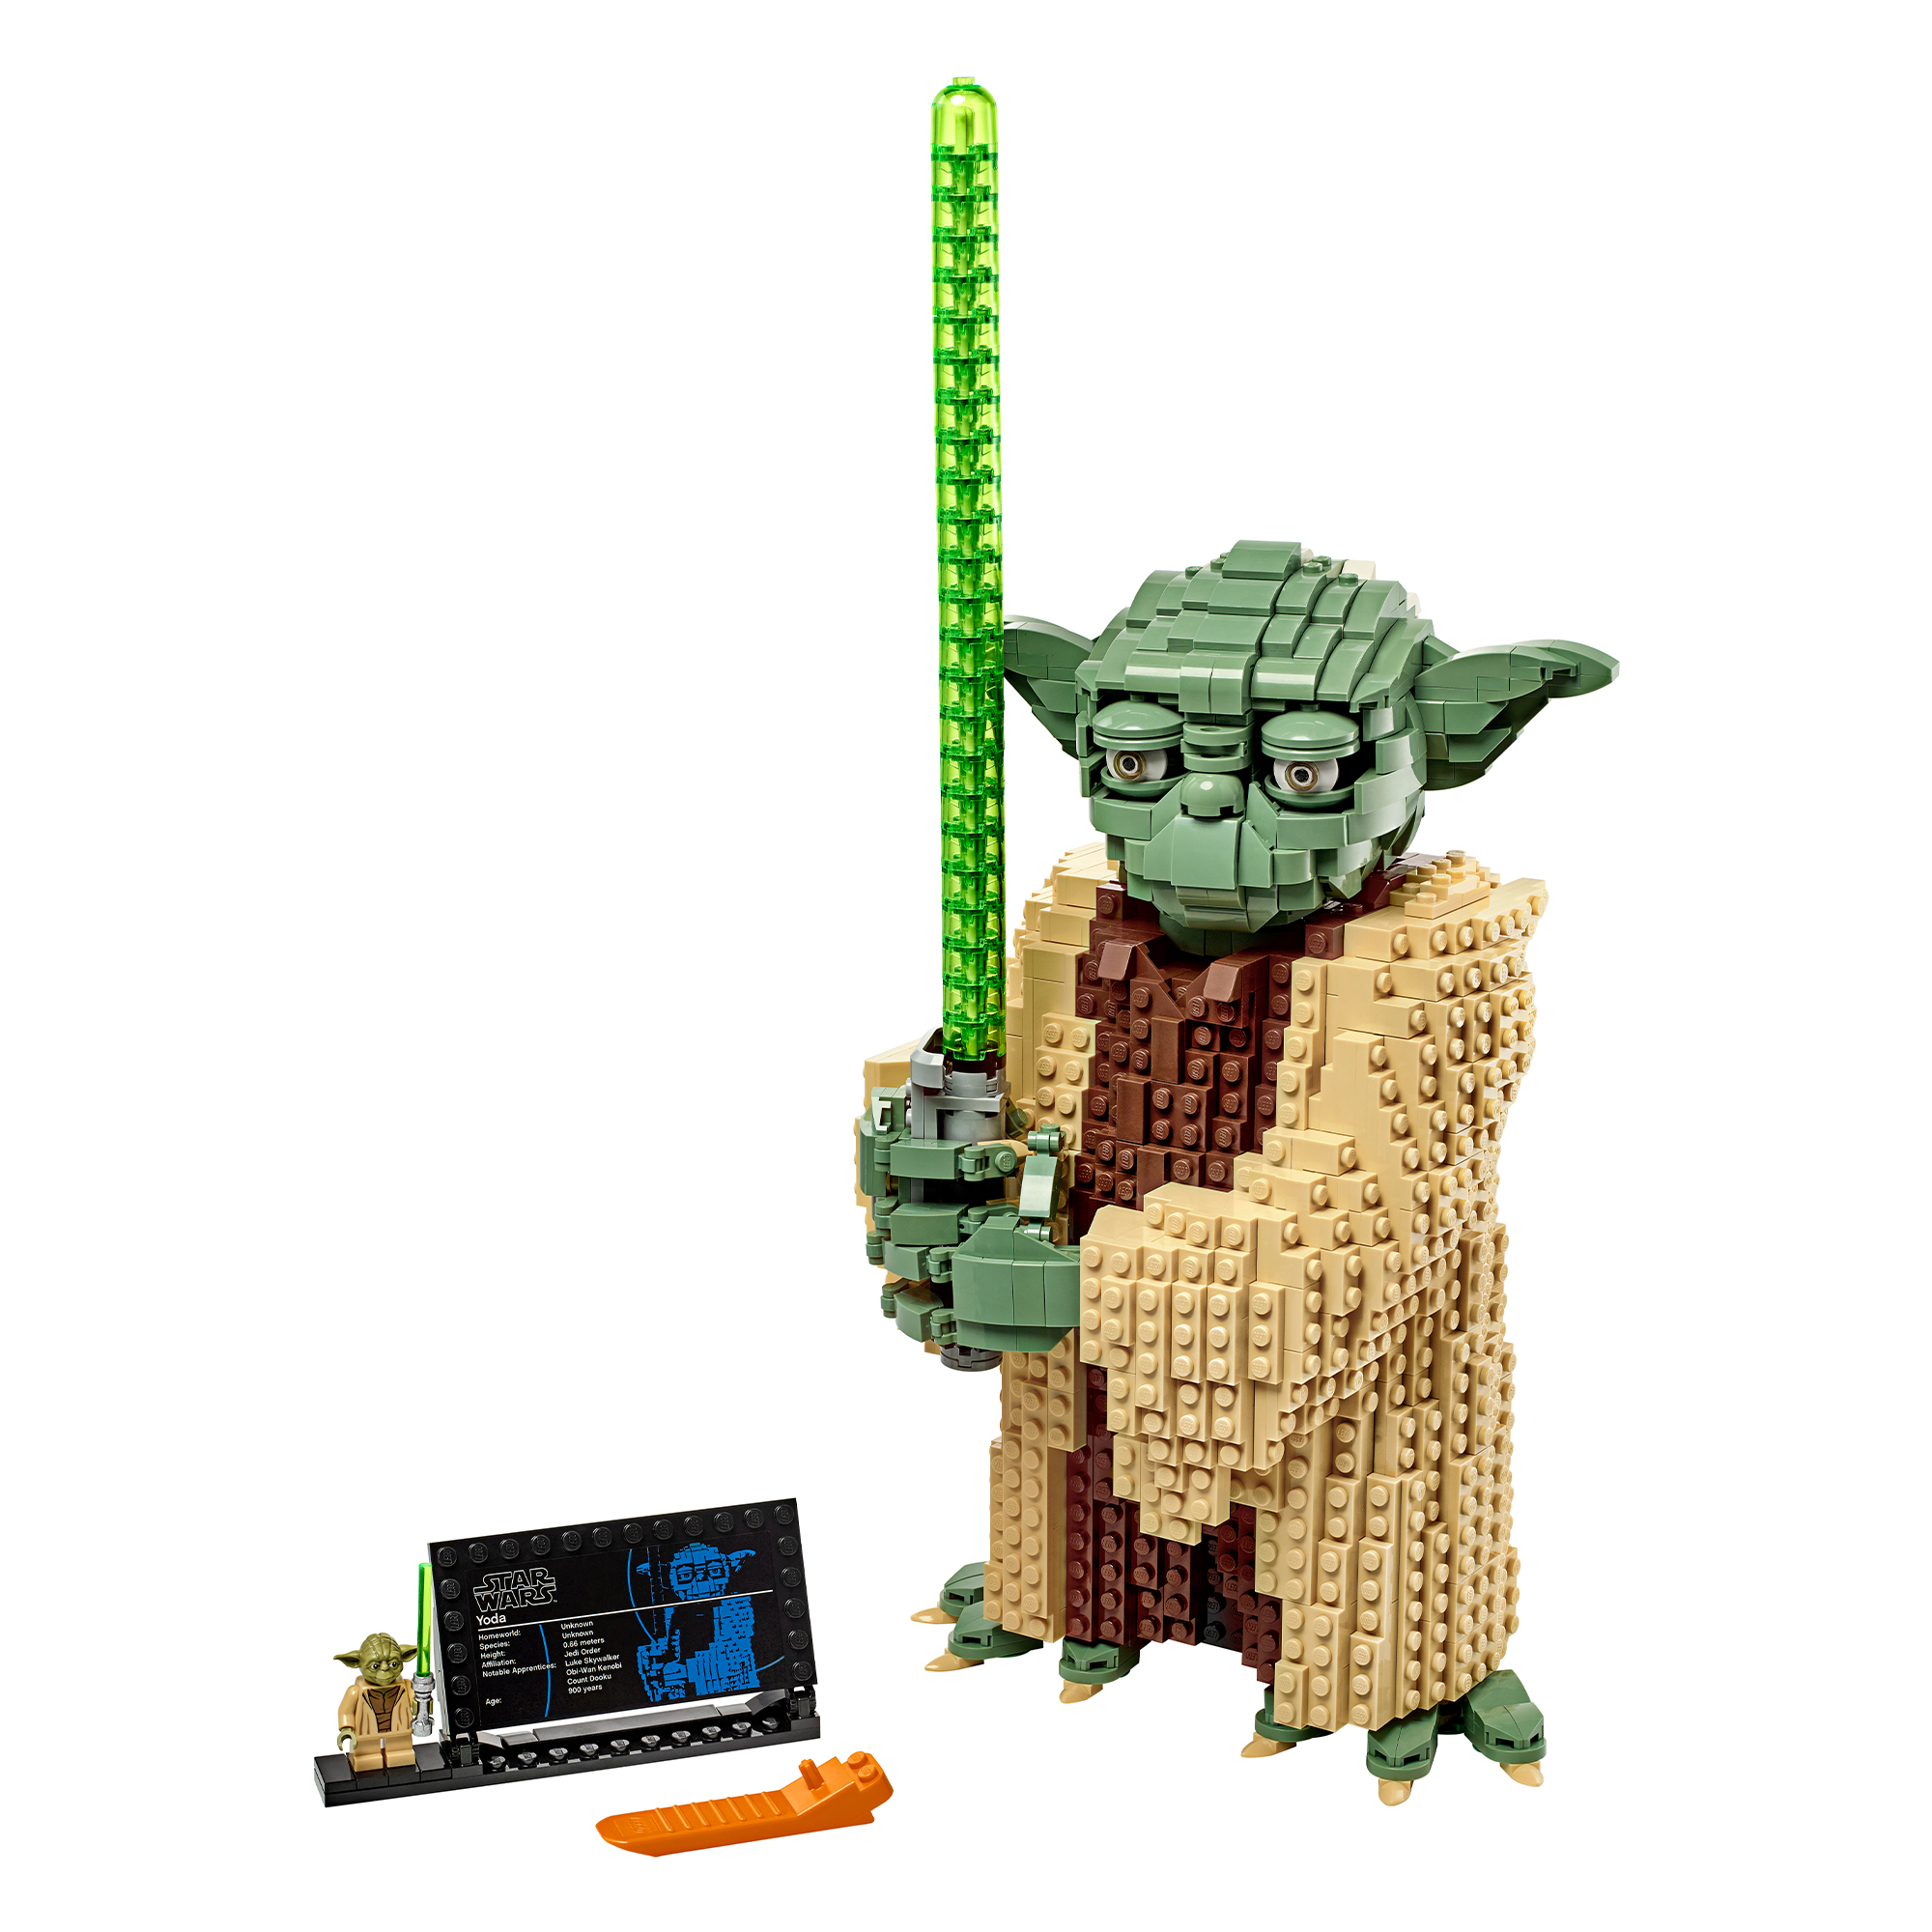 LEGO Star Wars: Attack of the Clones Yoda 75255 Building Toy Set (1,771 Pieces) - image 1 of 10